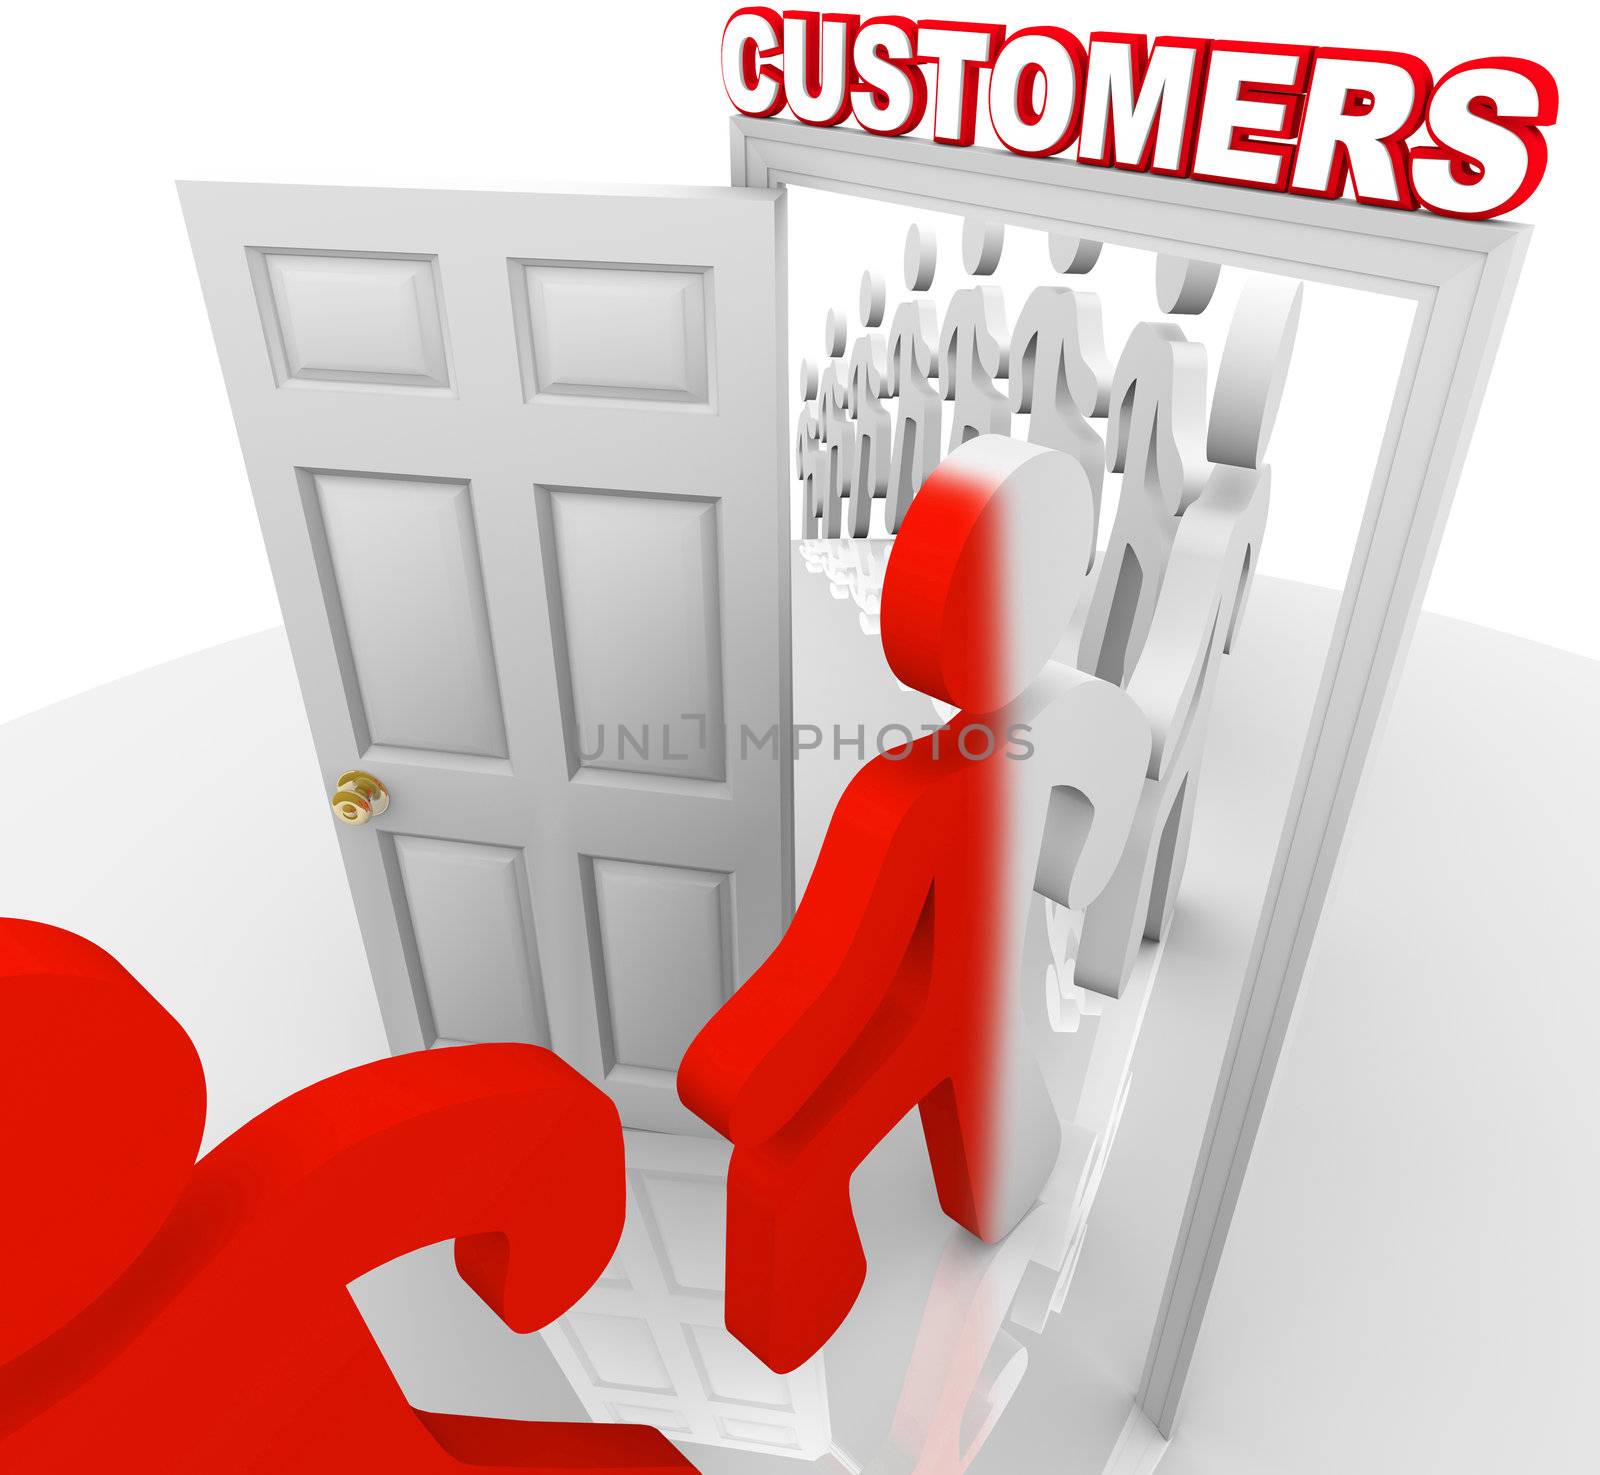 A line of people step through a doorway marked Customers and become transformed from prospects into new buyers, illustrating a successful marketing to selling process and campaign